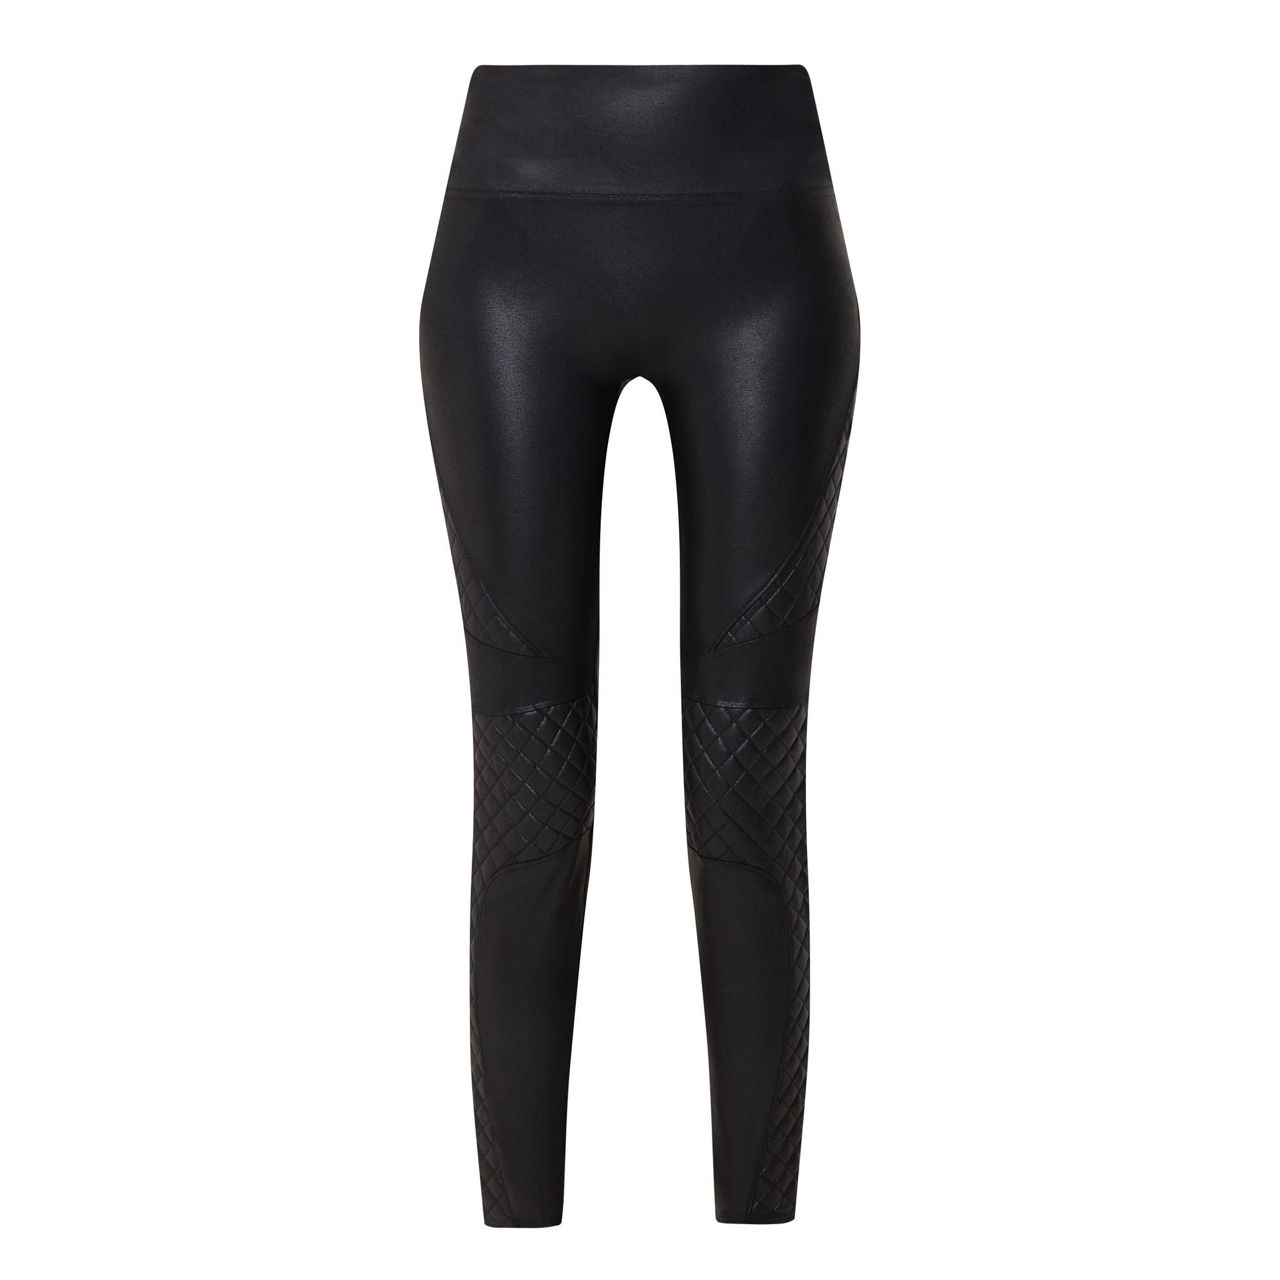 Leggings for sale in Co. Tipperary for €50 on DoneDeal